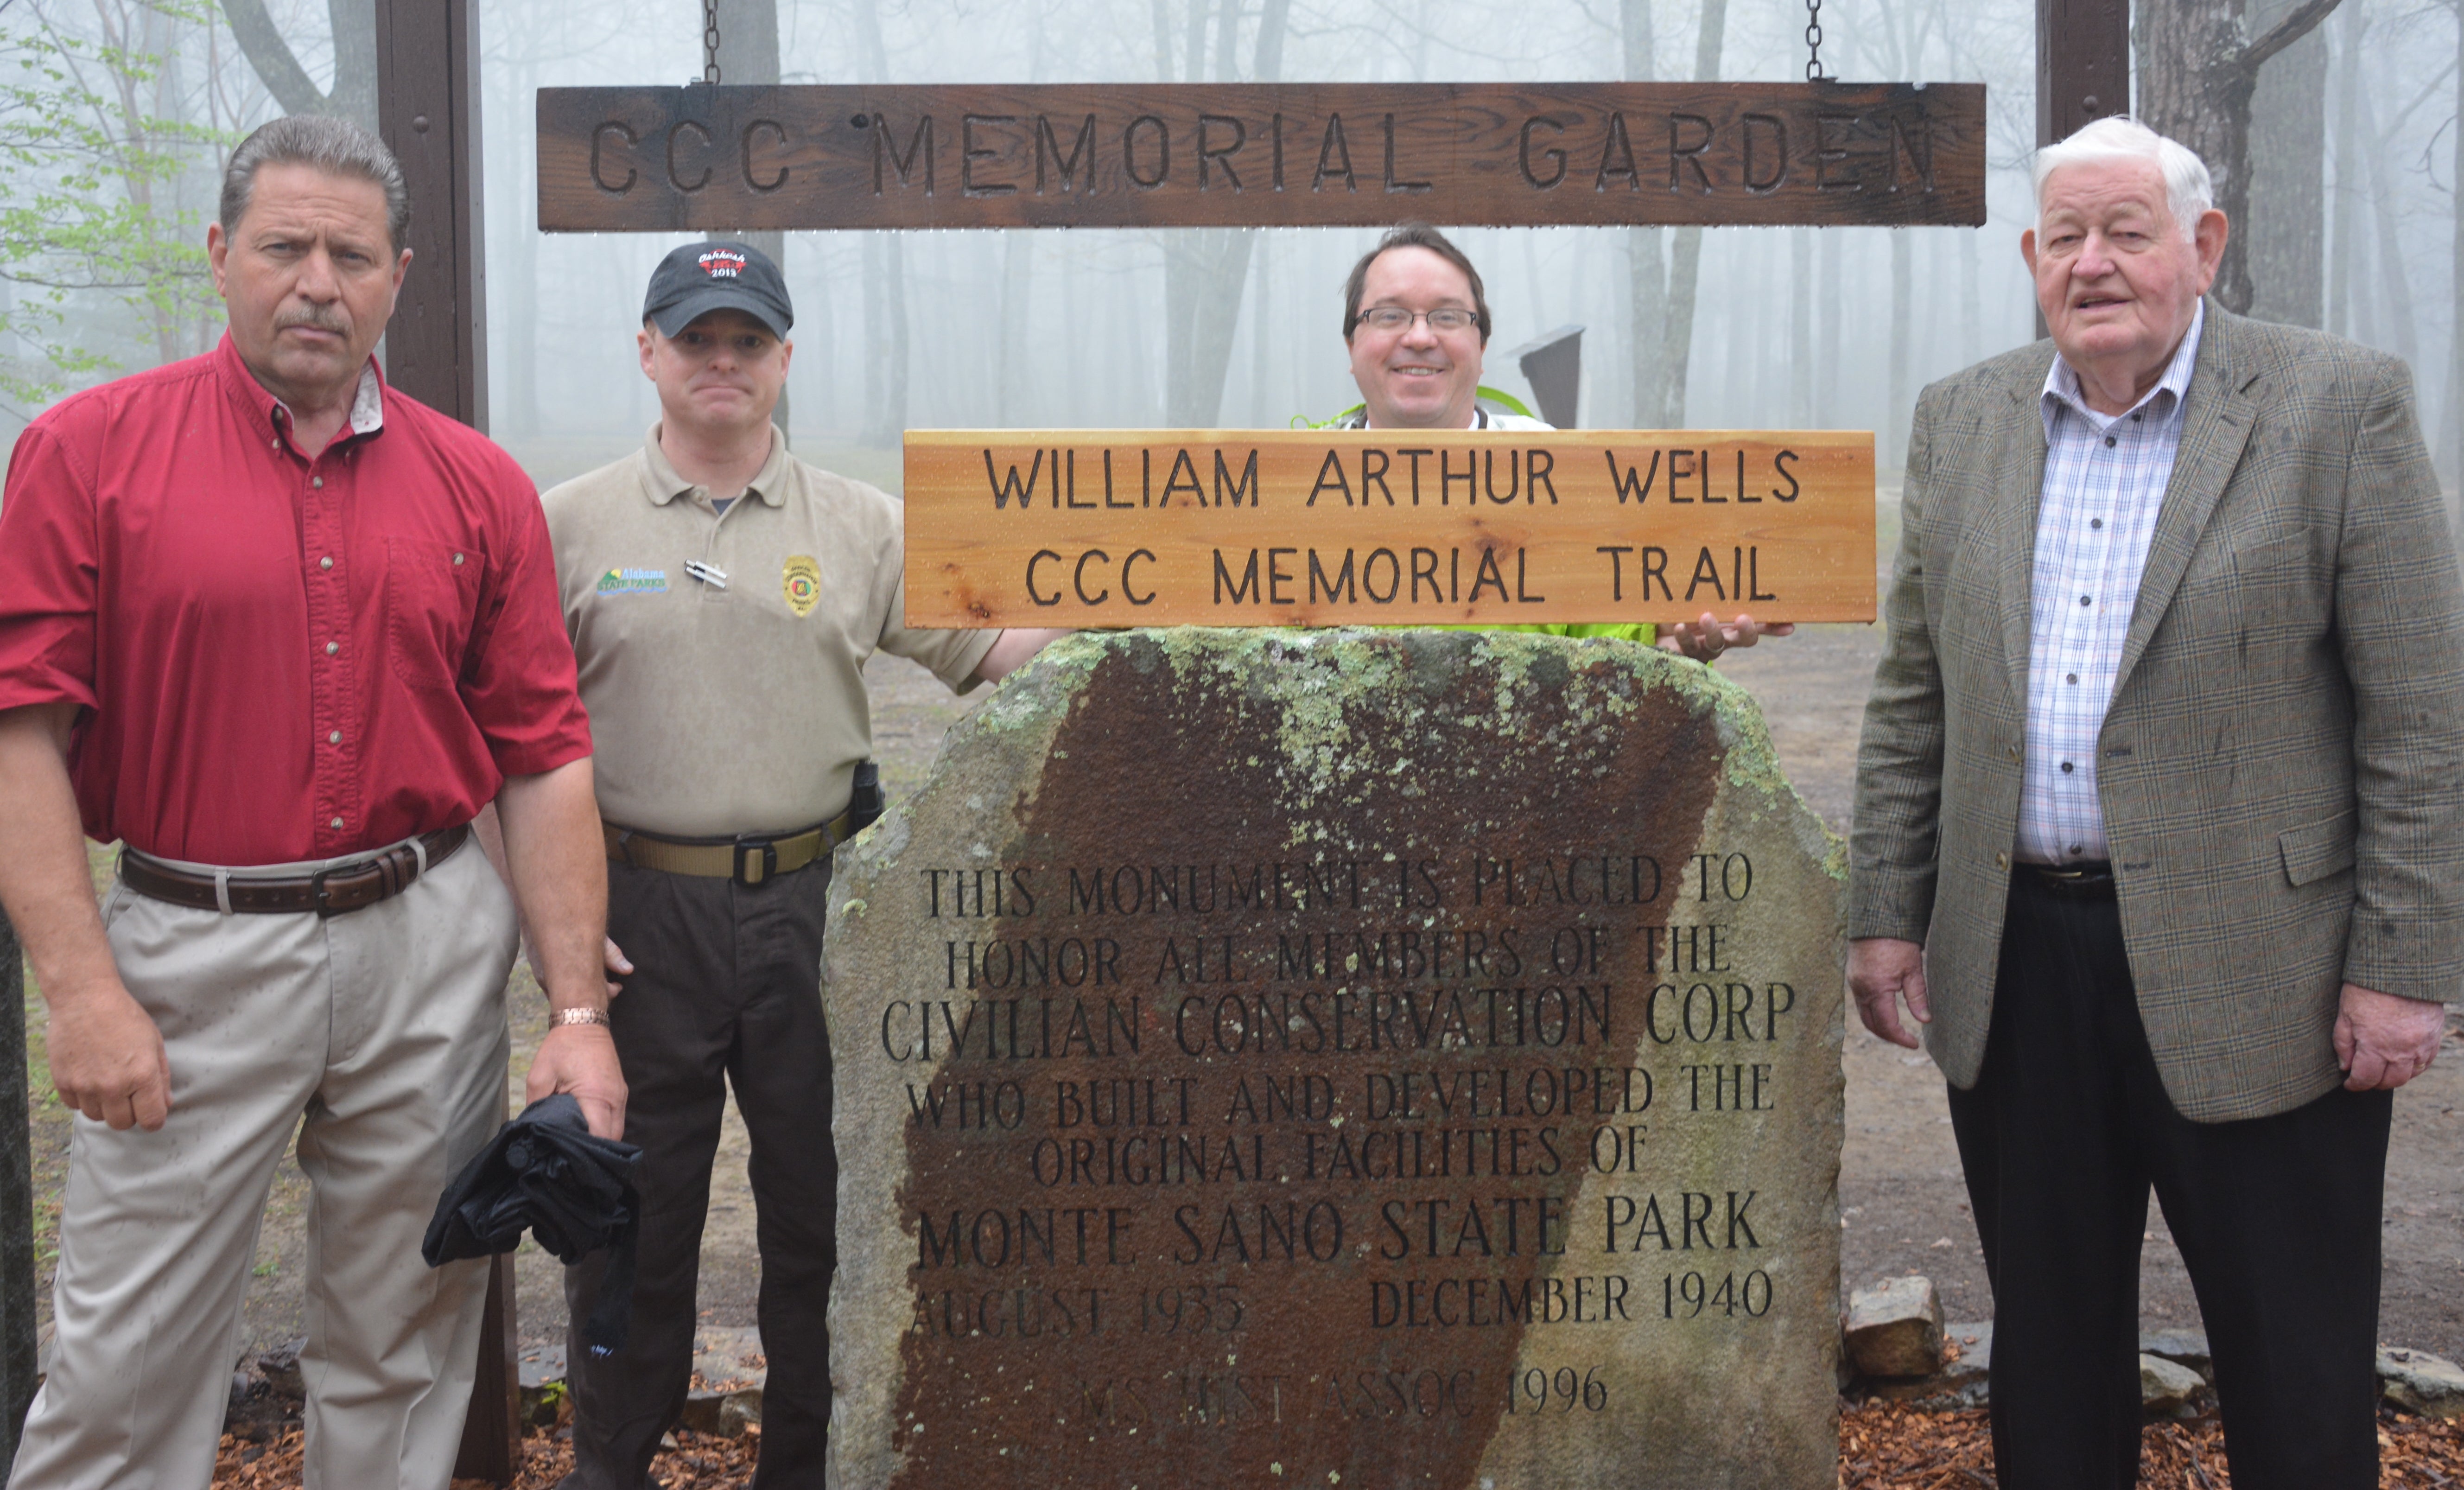 A 1.5-mile trail at Monte Sano State Park was officially renamed the William Arthur Wells Trail in Huntsville on Saturday. Showing off the new trail sign are from left, Chuck Sisco, Park Manager Brian Moore, Alabama State Parks Division Director Greg Lein and Robert Wells. Wells, Sisco and Ricky Underwood donated the 40 acres that the trail crosses to the park.